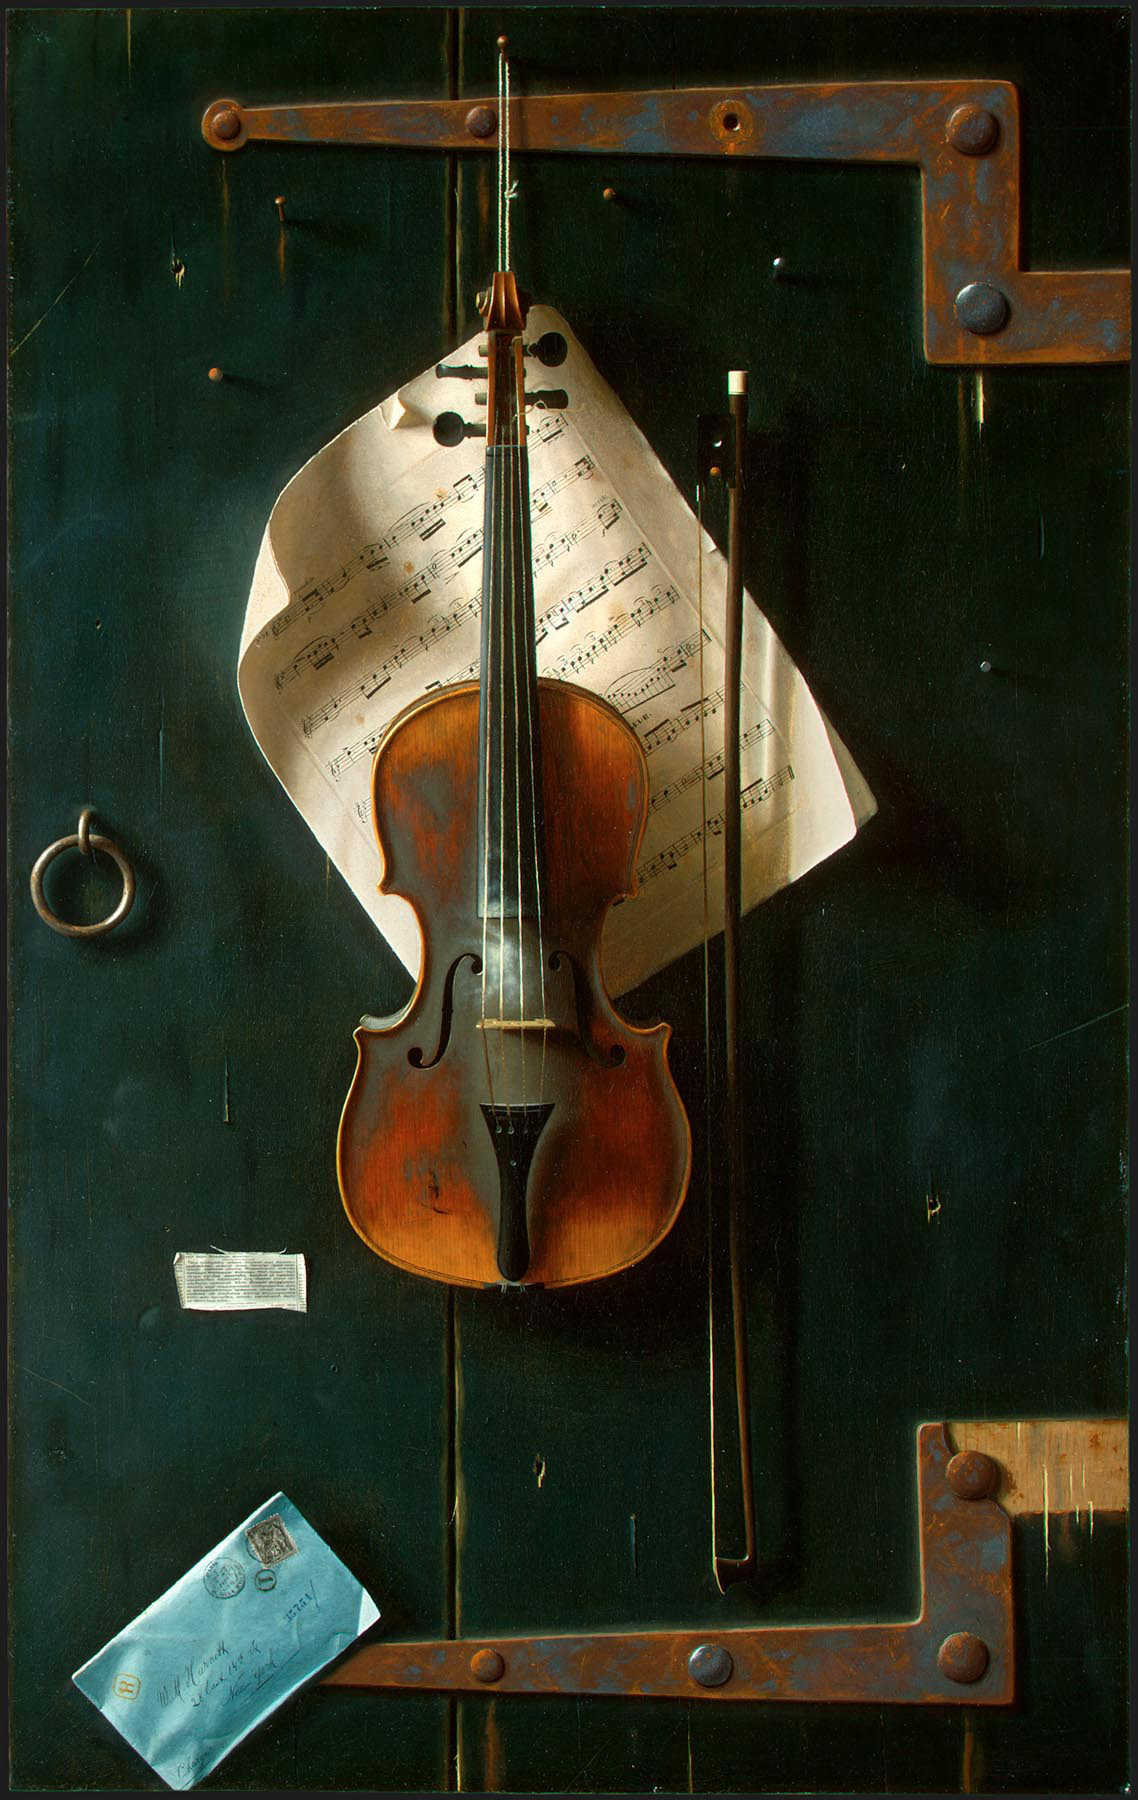 Old Violin by William Harnett - 1886 - 96.5 x 60 cm National Gallery of Art